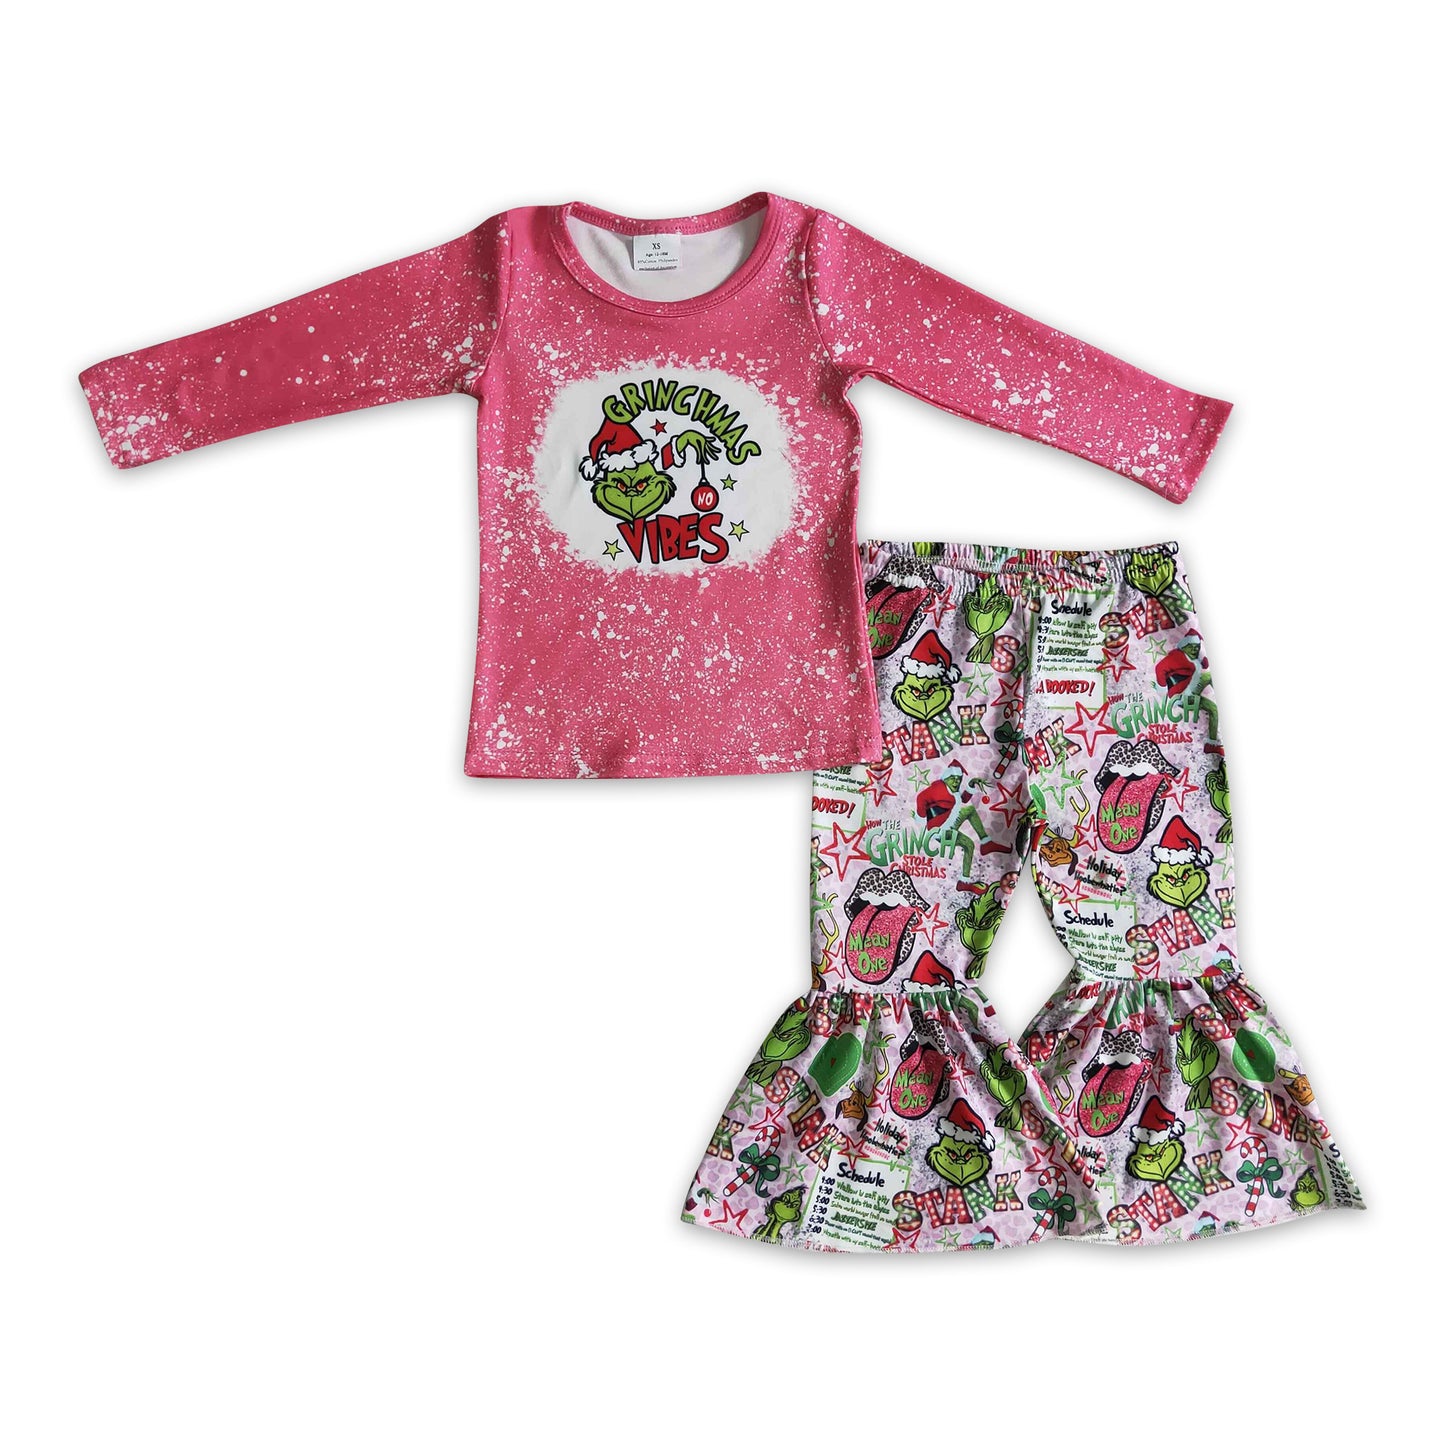 Green face vibes kids girls Christmas outfits